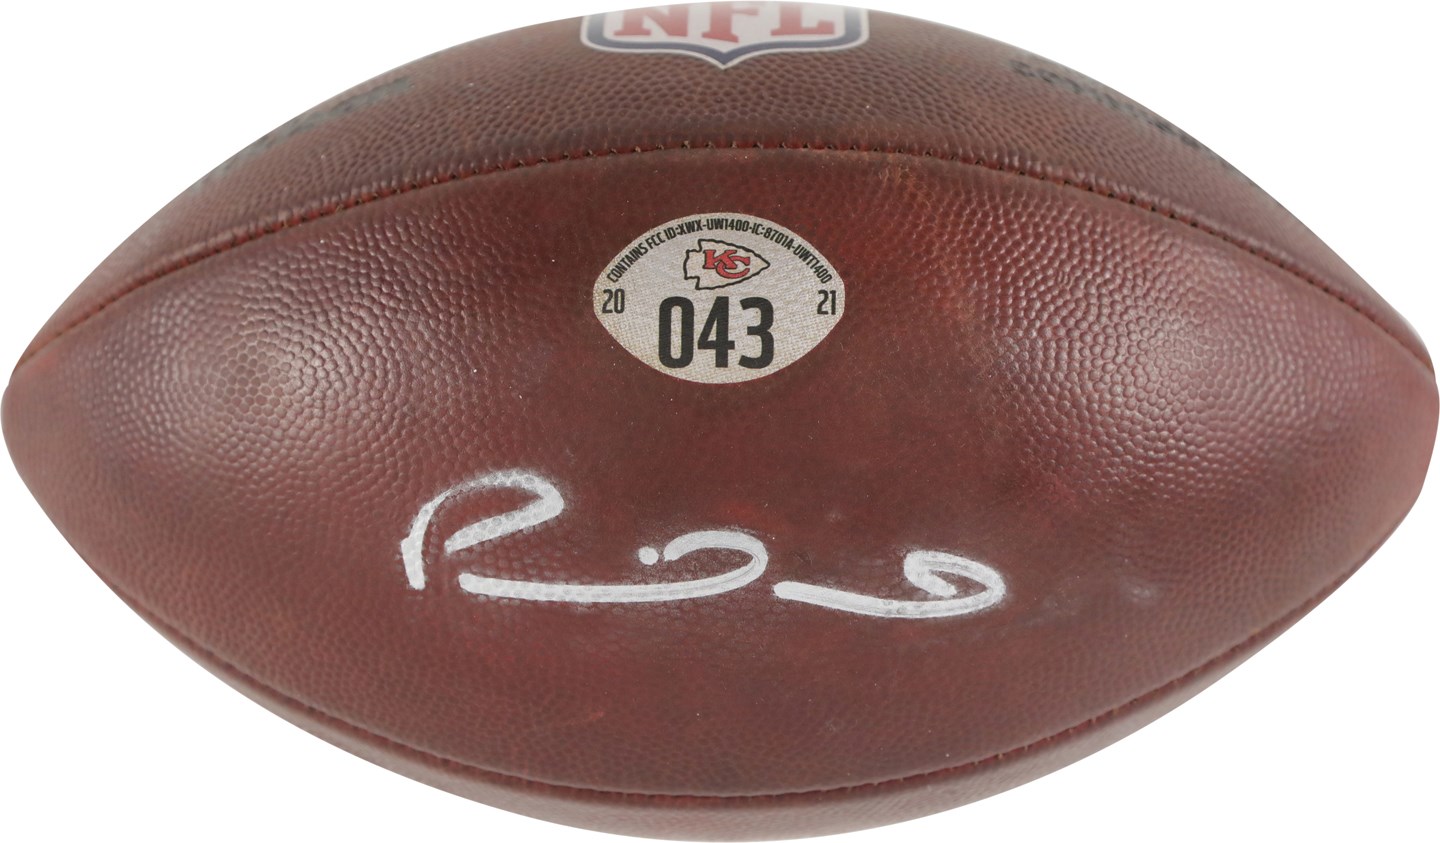 - /12/21 Patrick Mahomes Signed Game Used Rushing Touchdown Football for the First Kansas City Chiefs Touchdown of the Season! (Resolution Photomatching & Chiefs LOA)